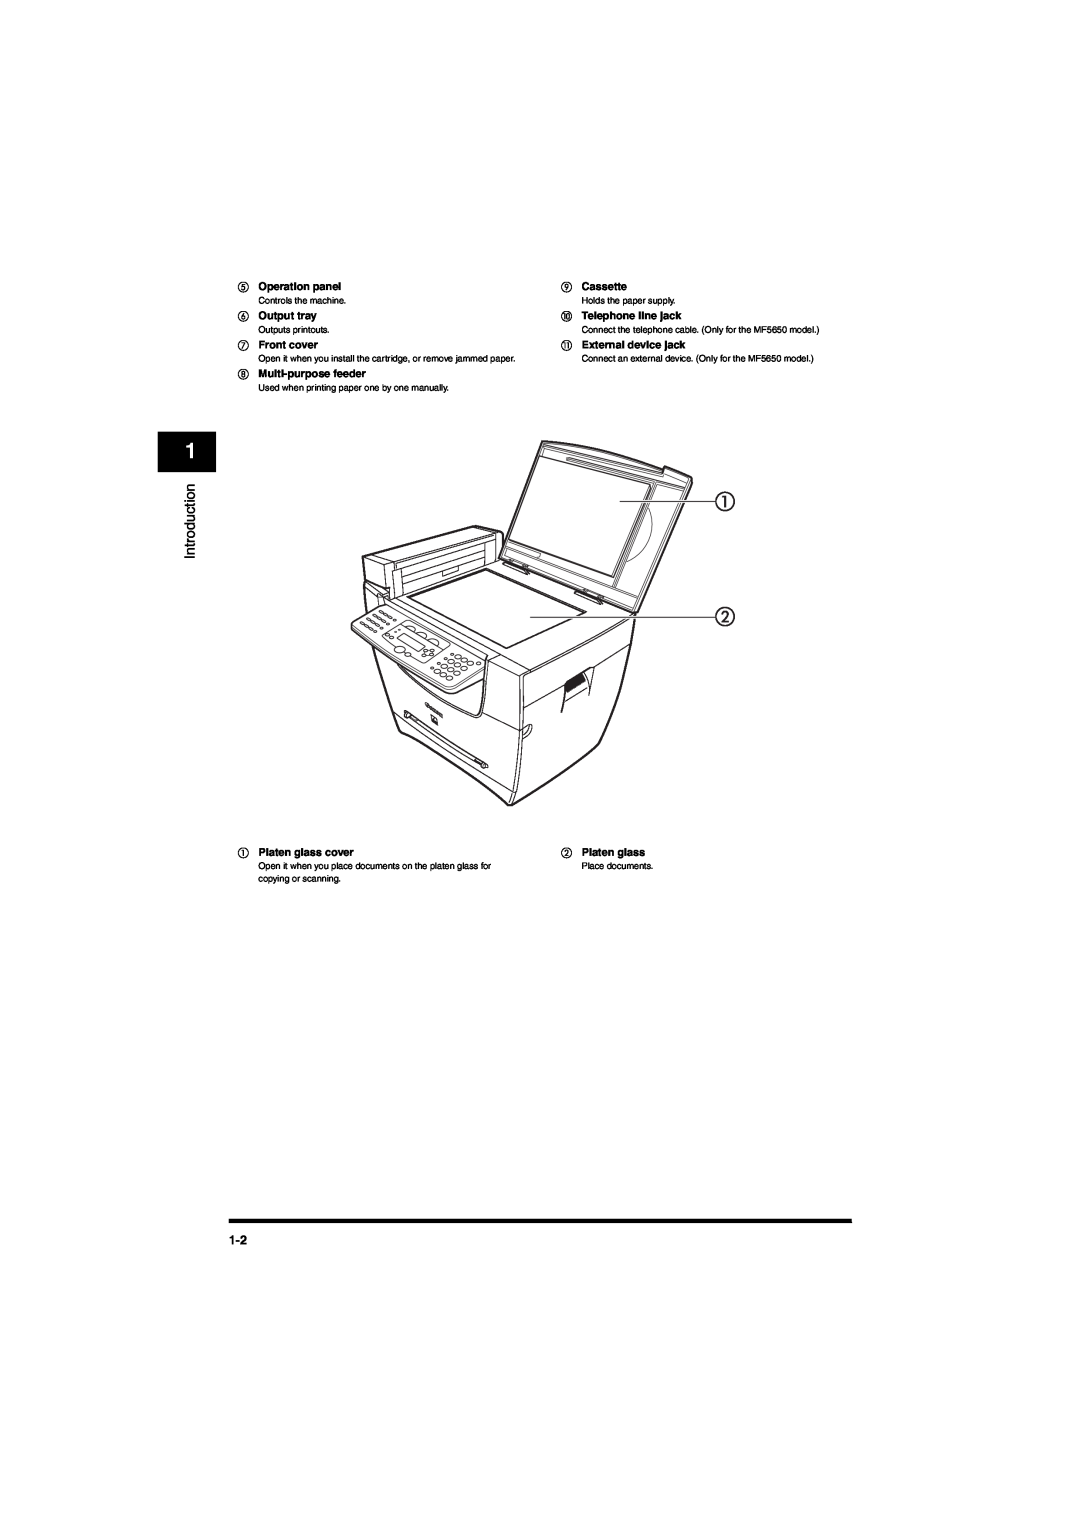 Canon MF5650 manual Introduction, Controls the machine, Holds the paper supply, Outputs printouts, Place documents 